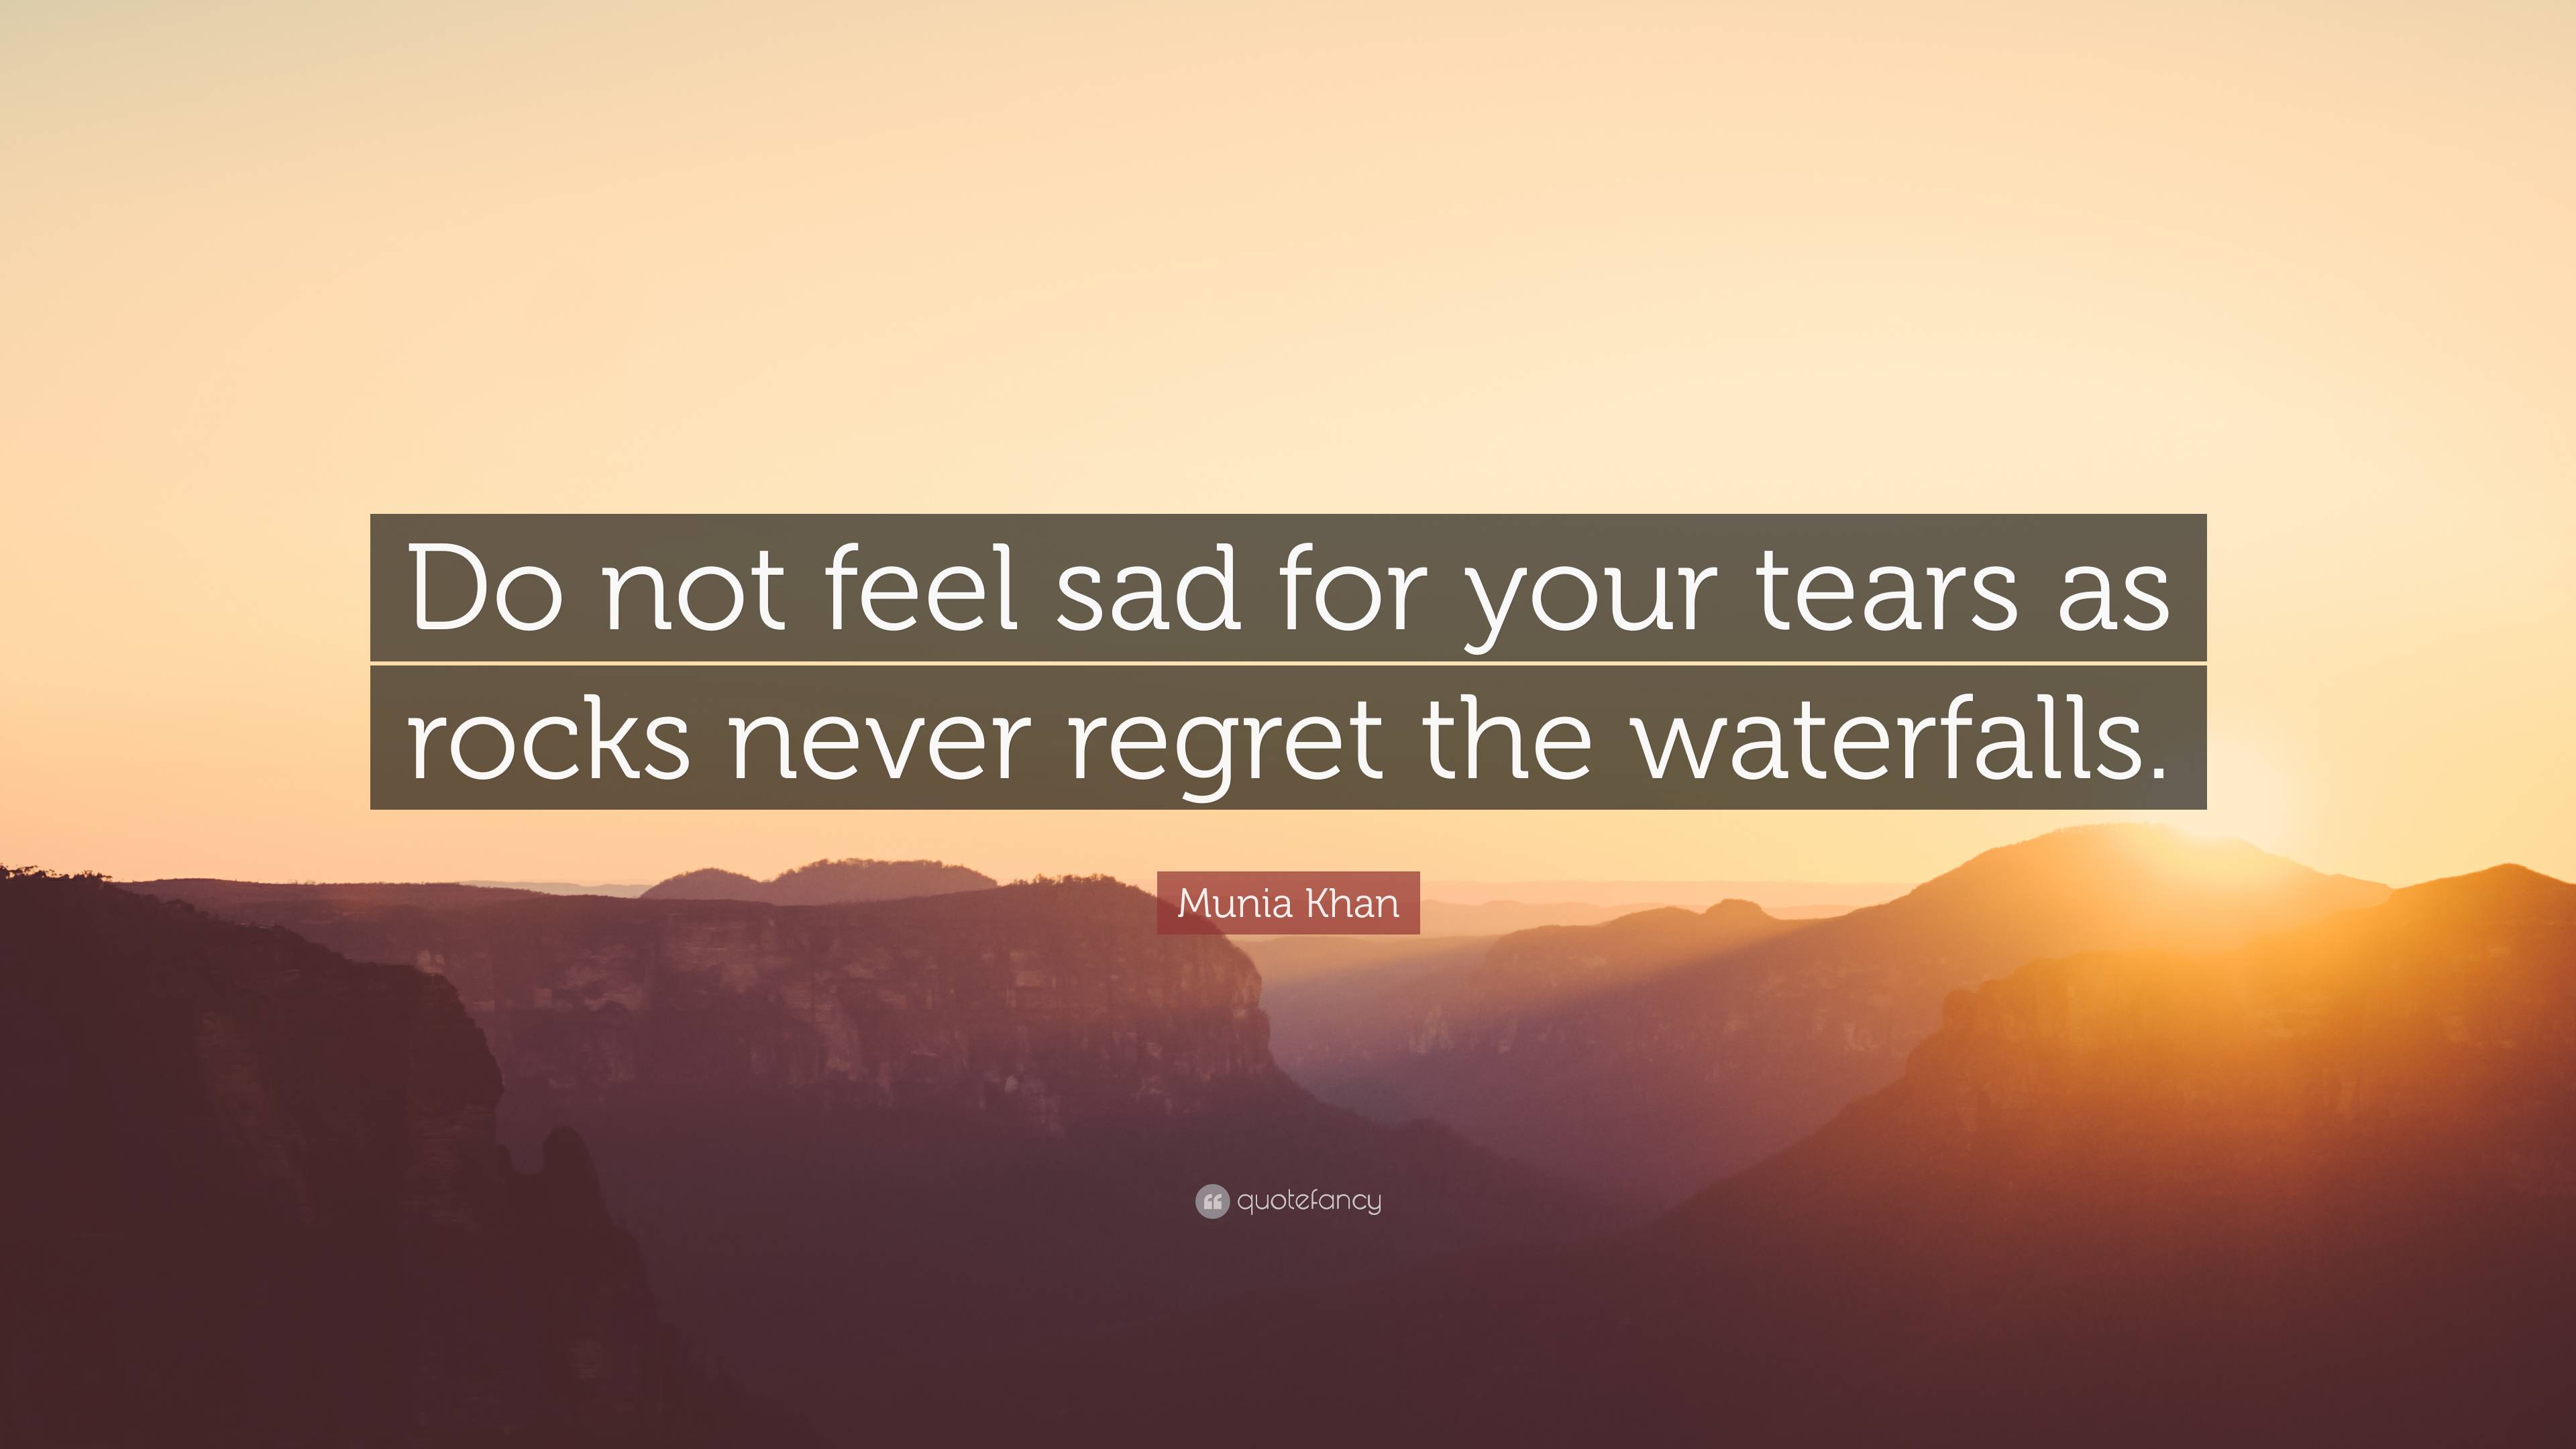 Munia Khan Quote: “Only pain can define the meaning of tears.”